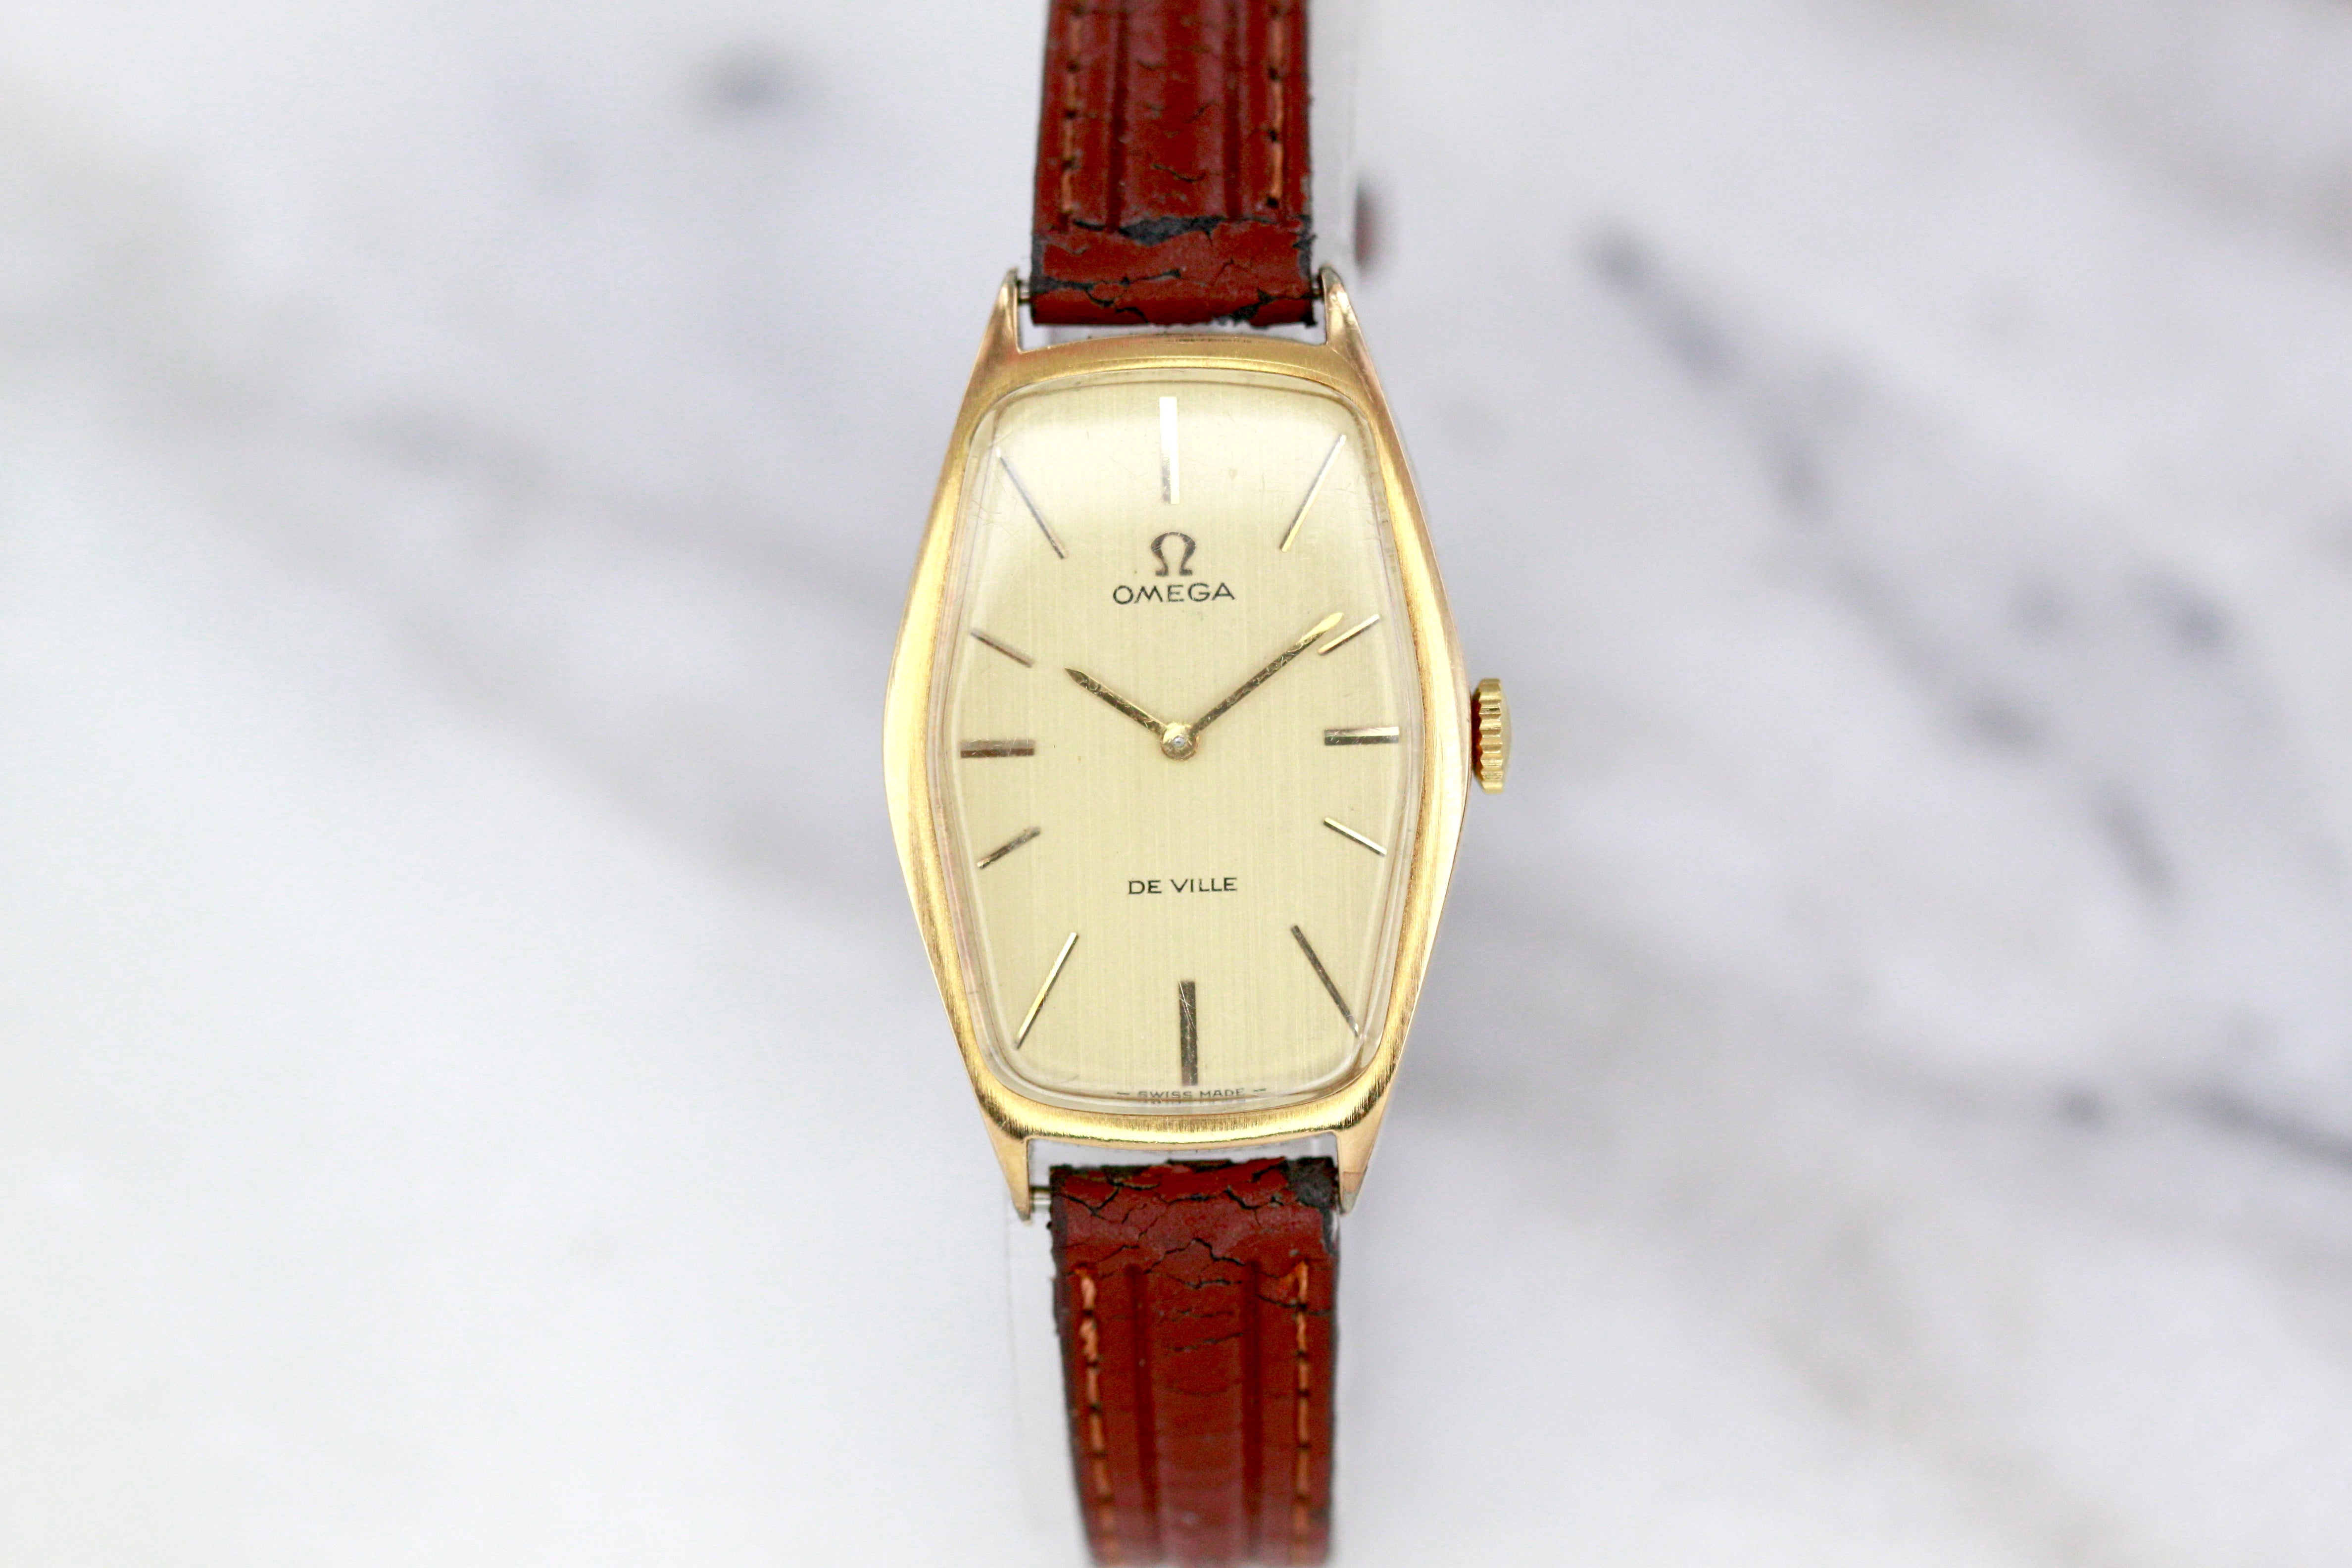 Omega lady Handwinding Gold plated watch from the 70s